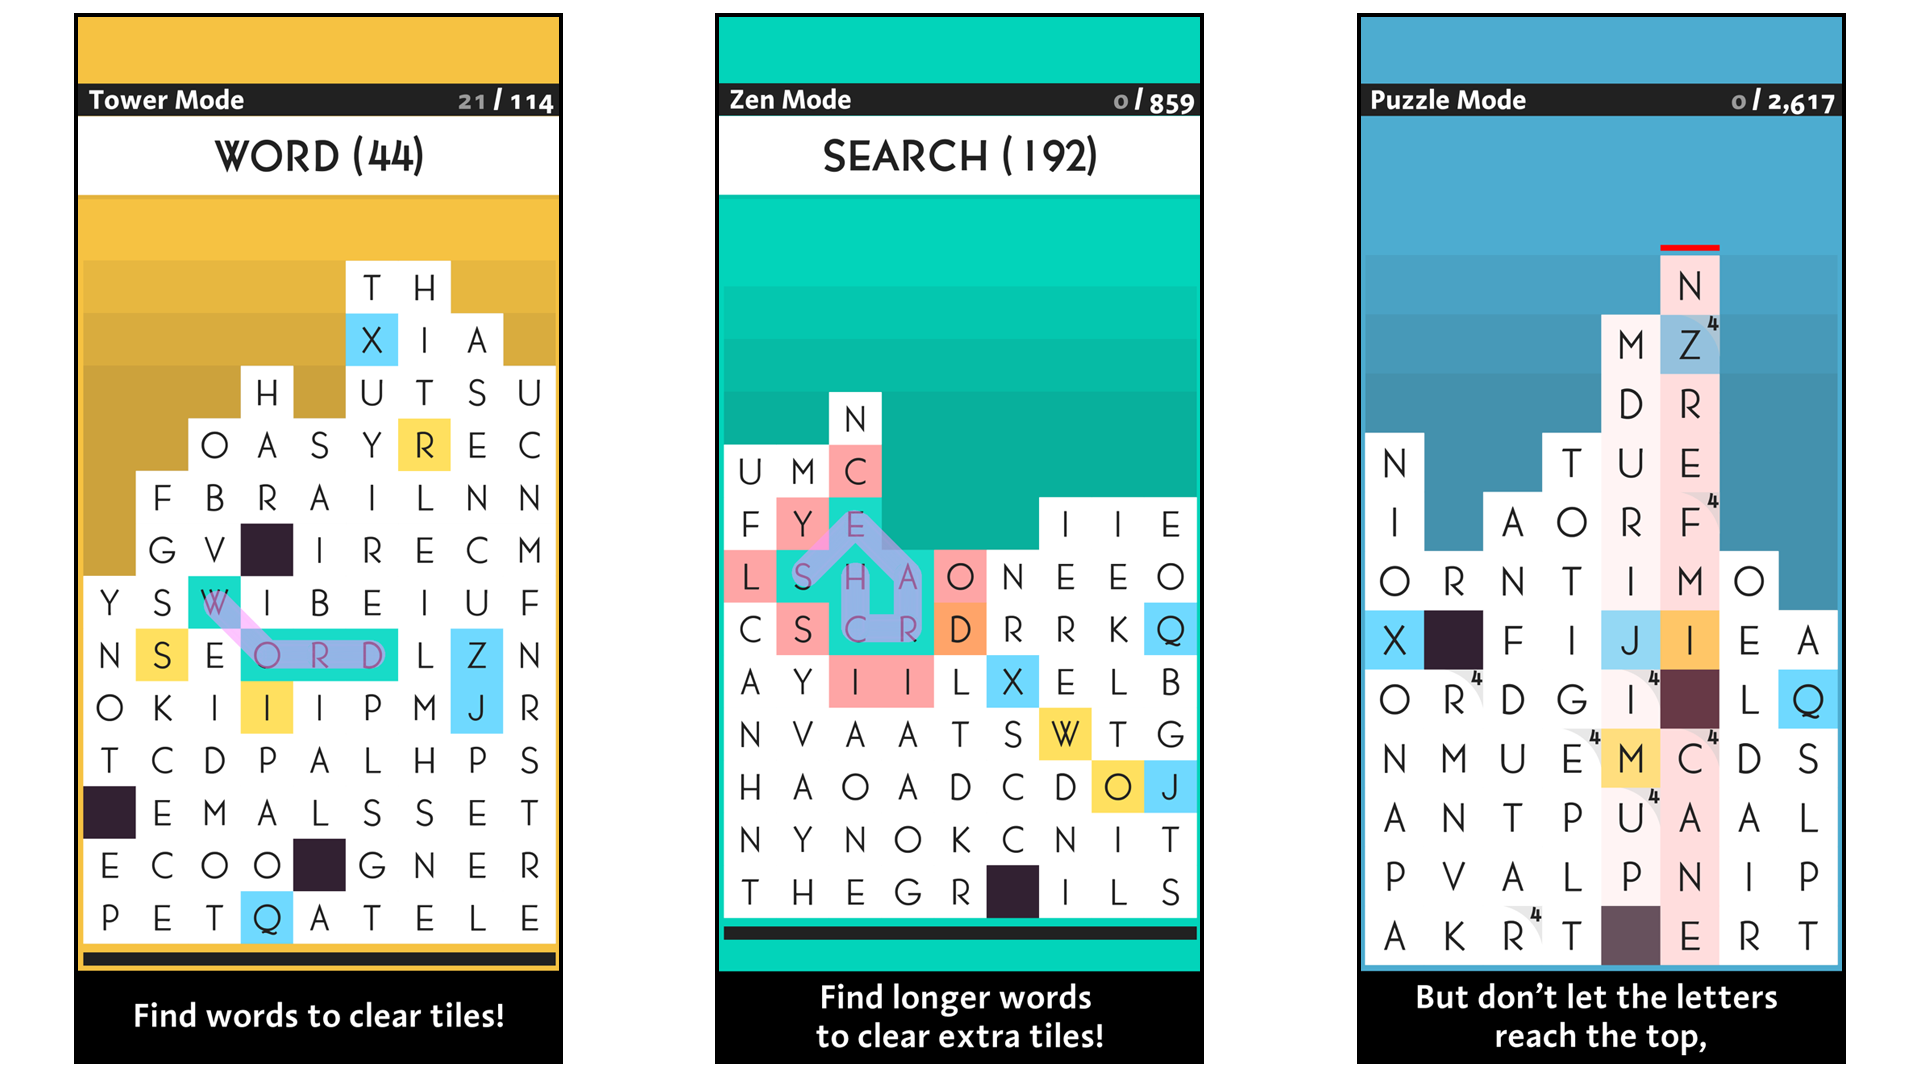 SpellTower app showing puzzles, word options, and different game modes